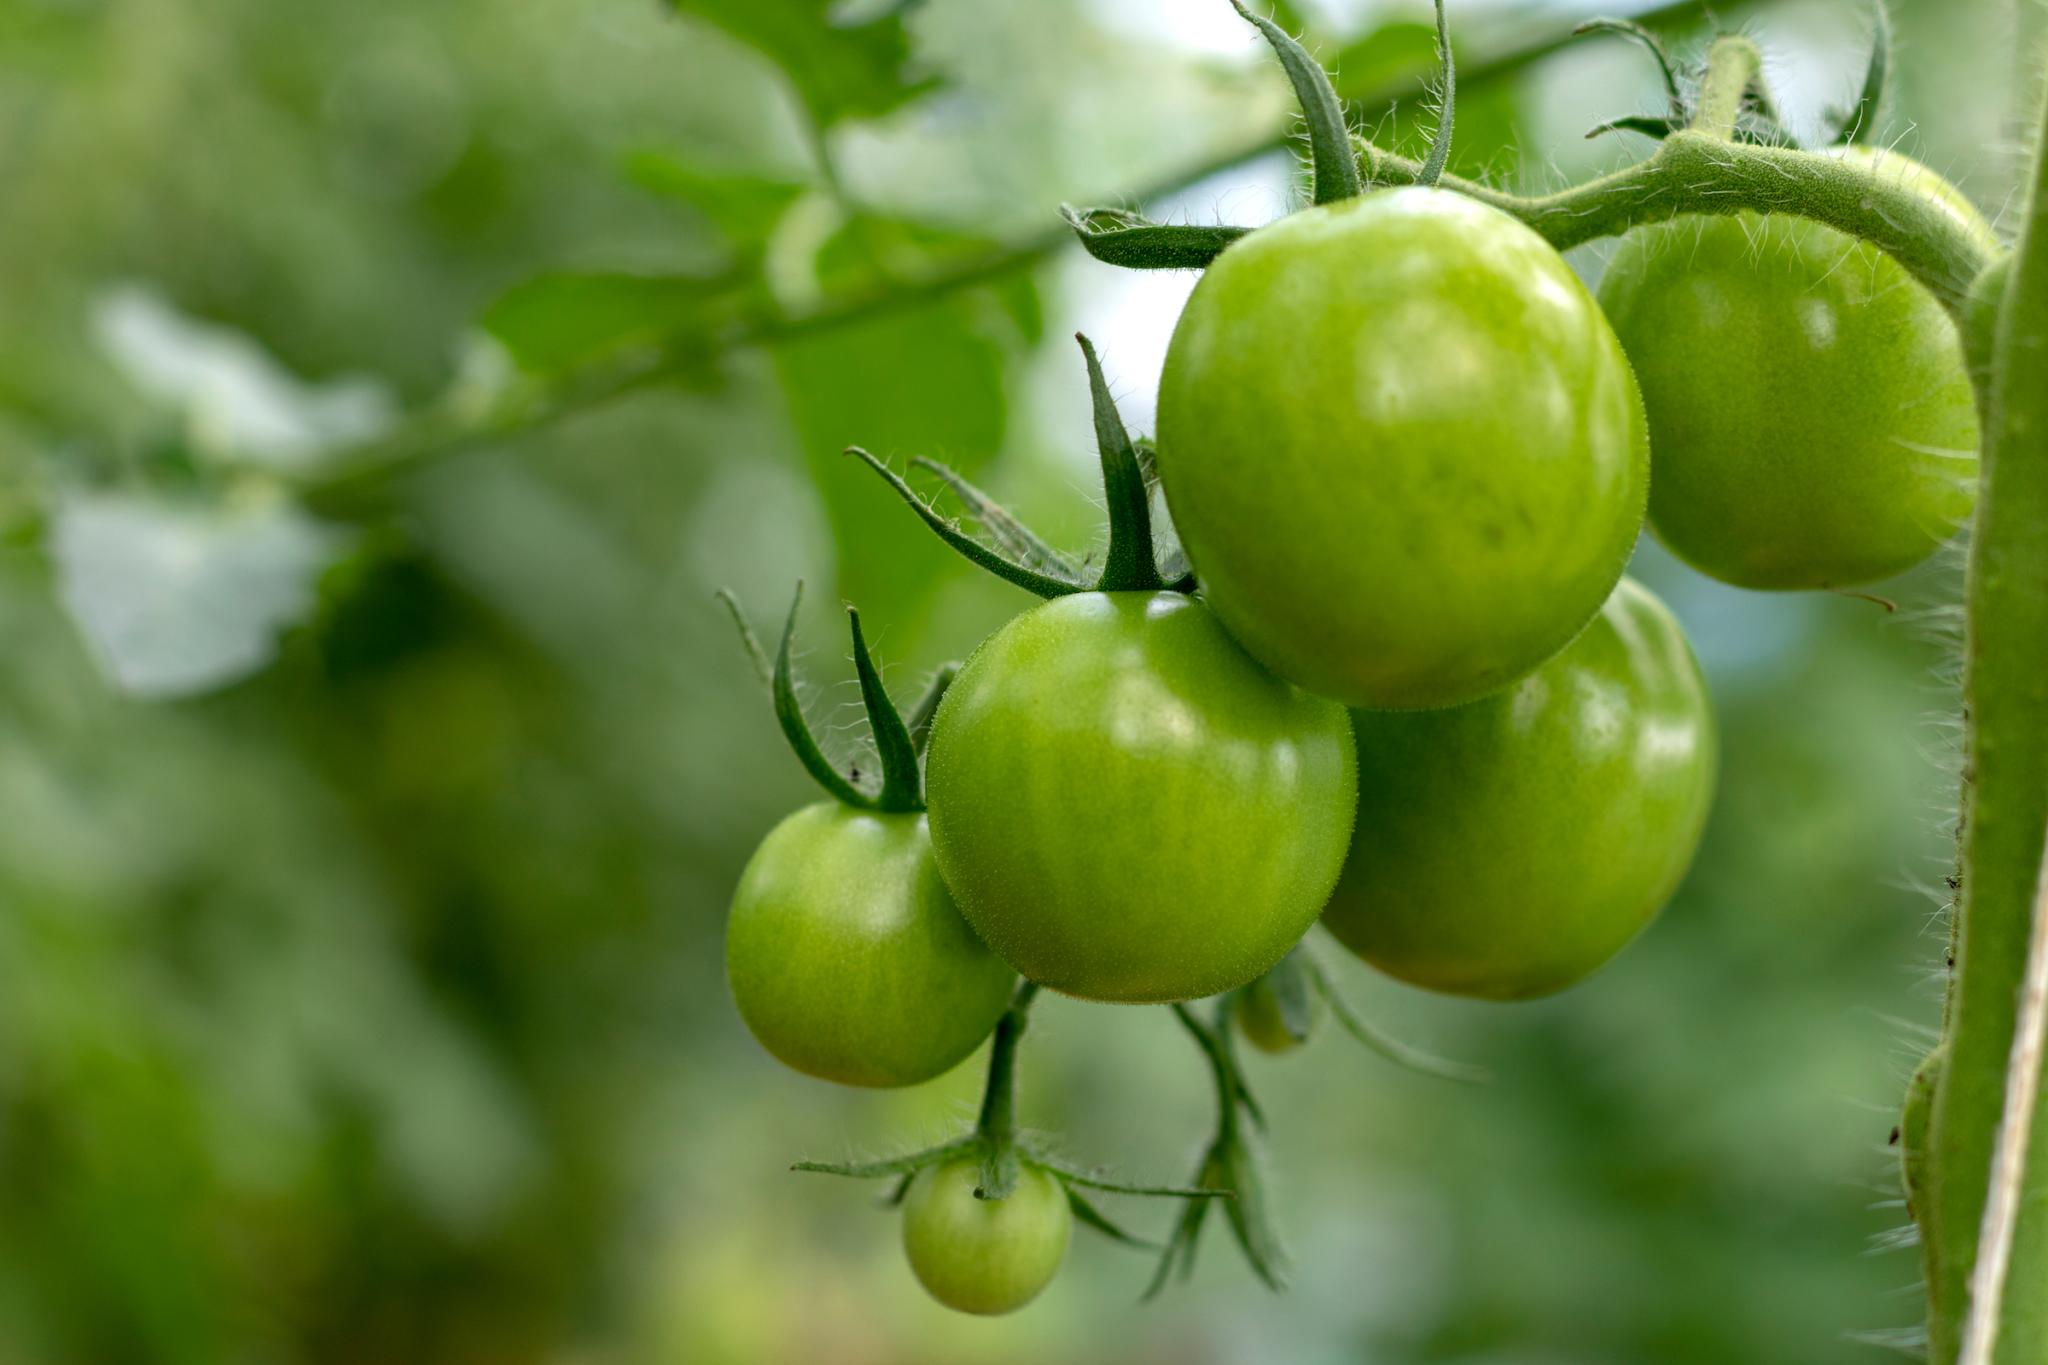 Unripened green tomatoes on the vine